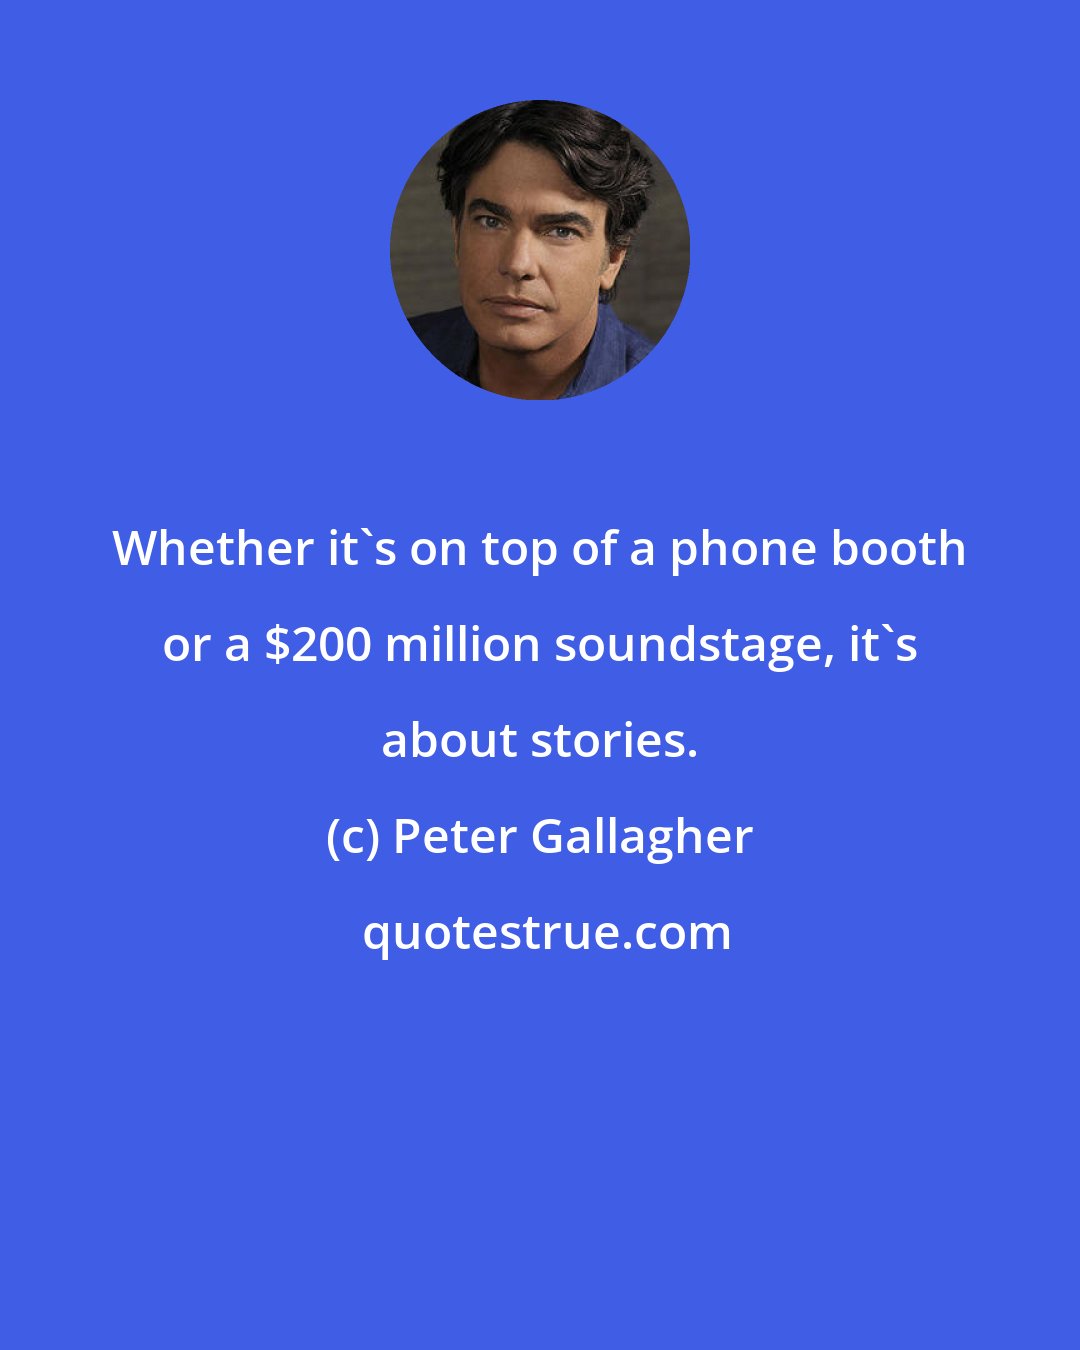 Peter Gallagher: Whether it's on top of a phone booth or a $200 million soundstage, it's about stories.